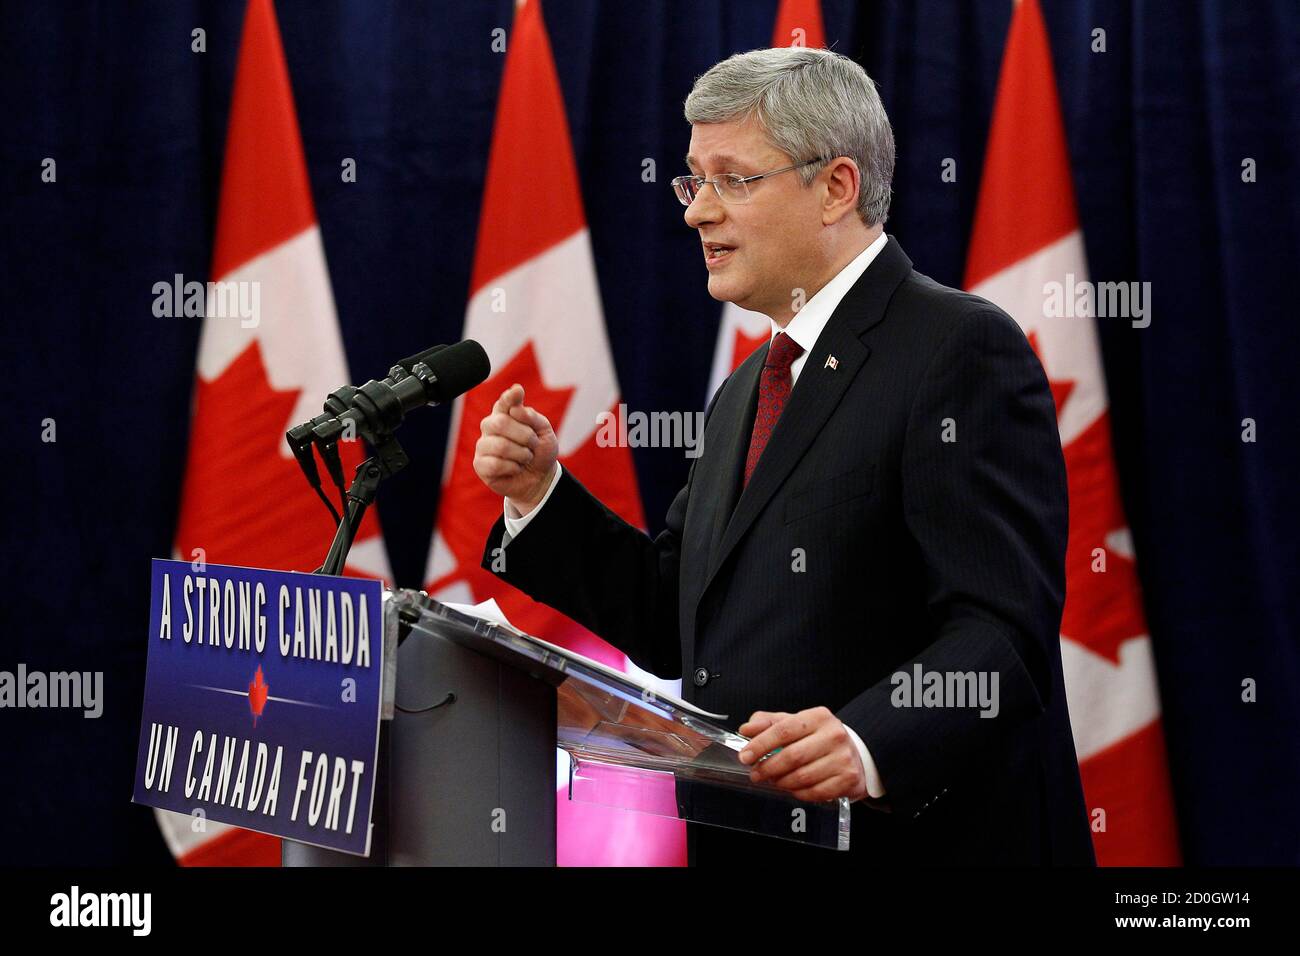 Canada's Prime Minister Stephen Harper speaks during a news conference on Parliament Hill in Ottawa December 7, 2012. Harper voiced confidence on Friday that Canada would still attract the investment it needs despite new curbs he has imposed on state-owned enterprises seeking to acquire majority stakes in oil sands businesses.  REUTERS/Chris Wattie (CANADA - Tags: POLITICS BUSINESS) Stock Photo